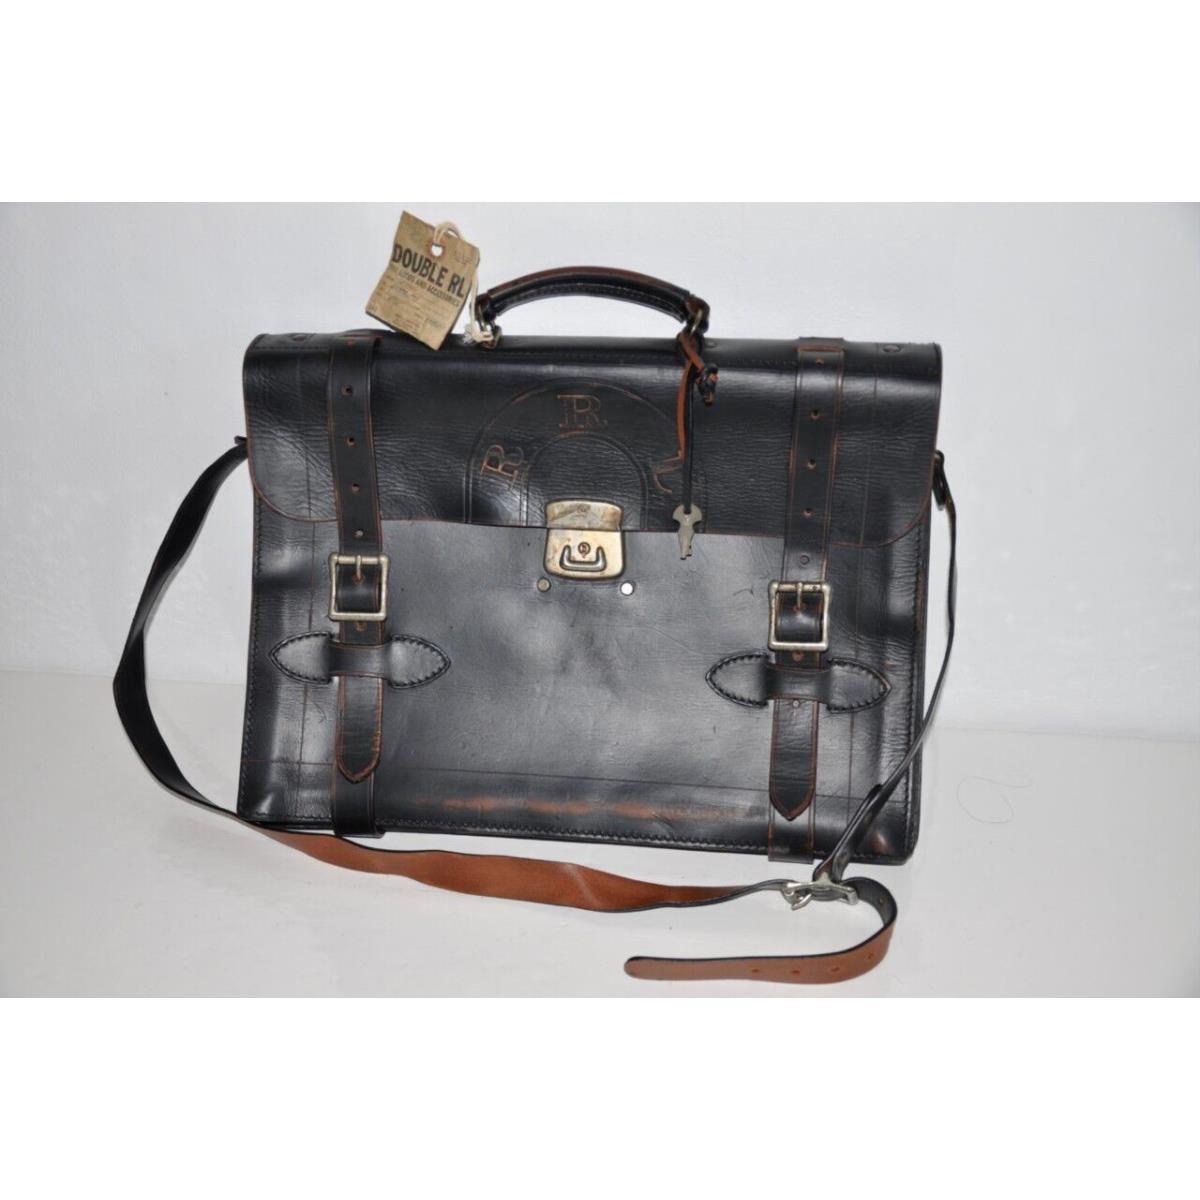 Ralph Lauren Rrl Made in Italy Distressed Leather Executive Briefcase Bag